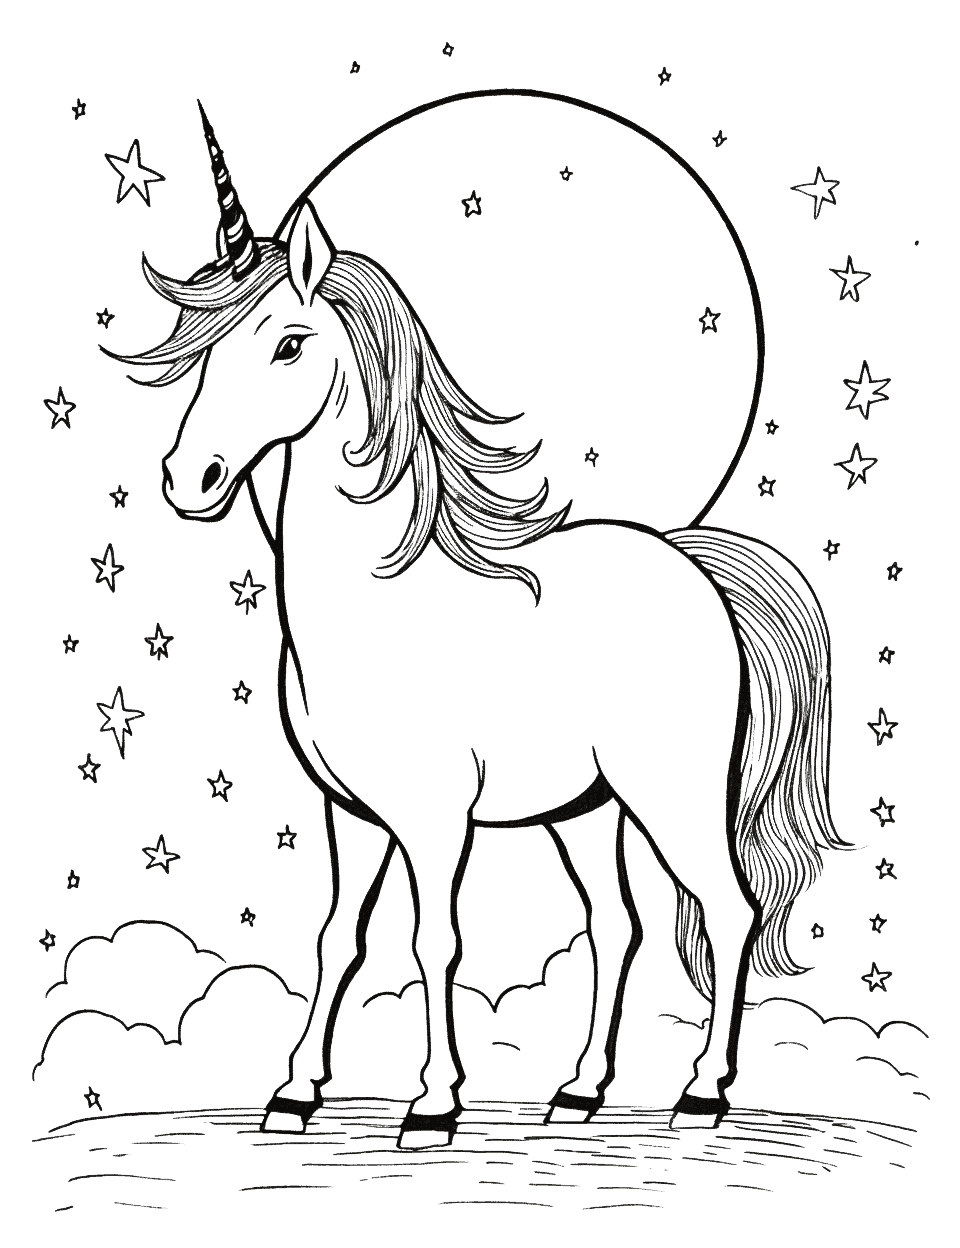 Unicorn in the Moonlight Horse Coloring Page - A mystical unicorn standing under the moonlight, surrounded by sparkling stars.